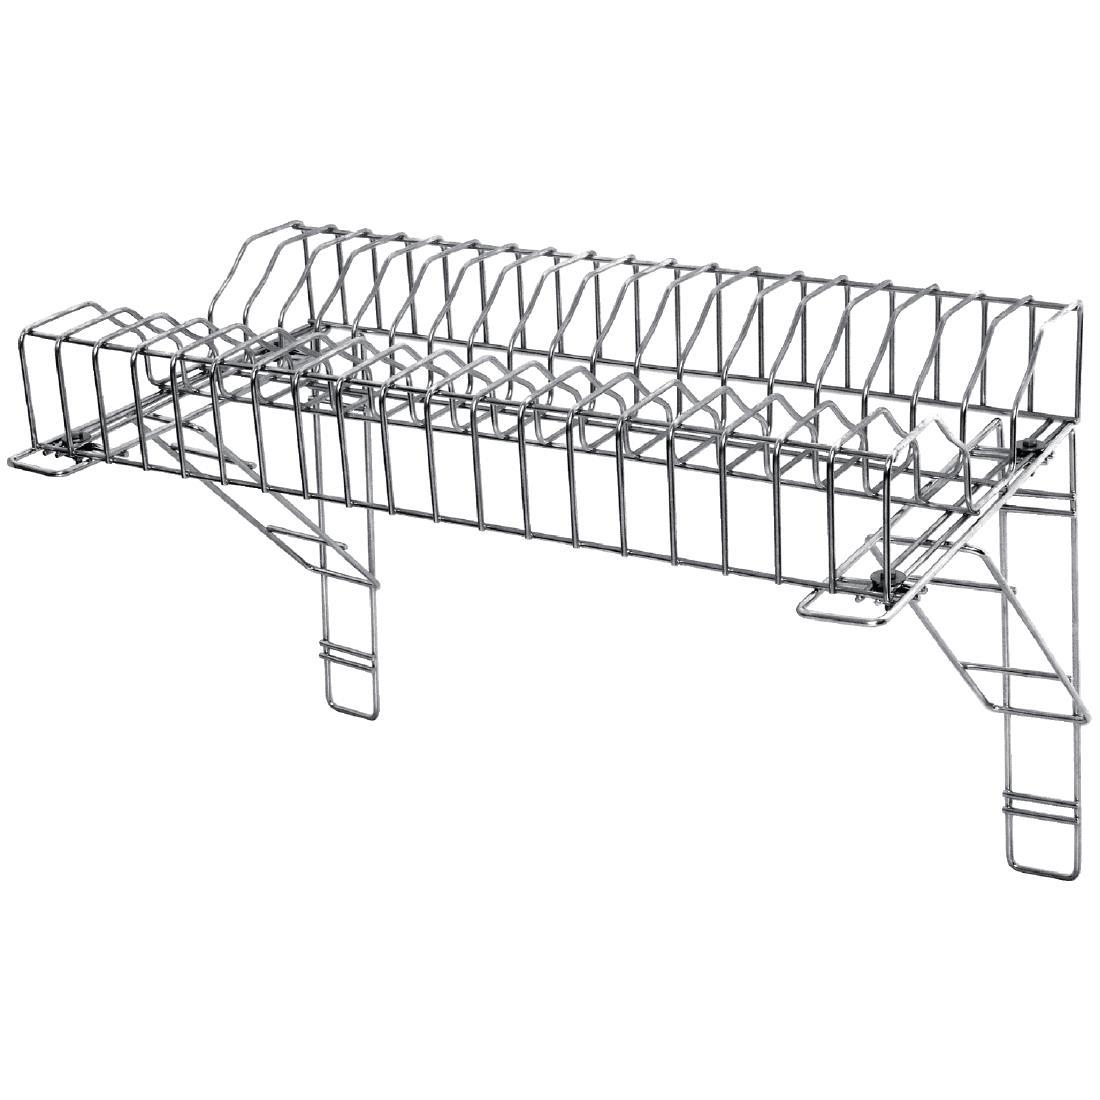 Vogue Stainless Steel Plate Racks 915mm - L441  - 2